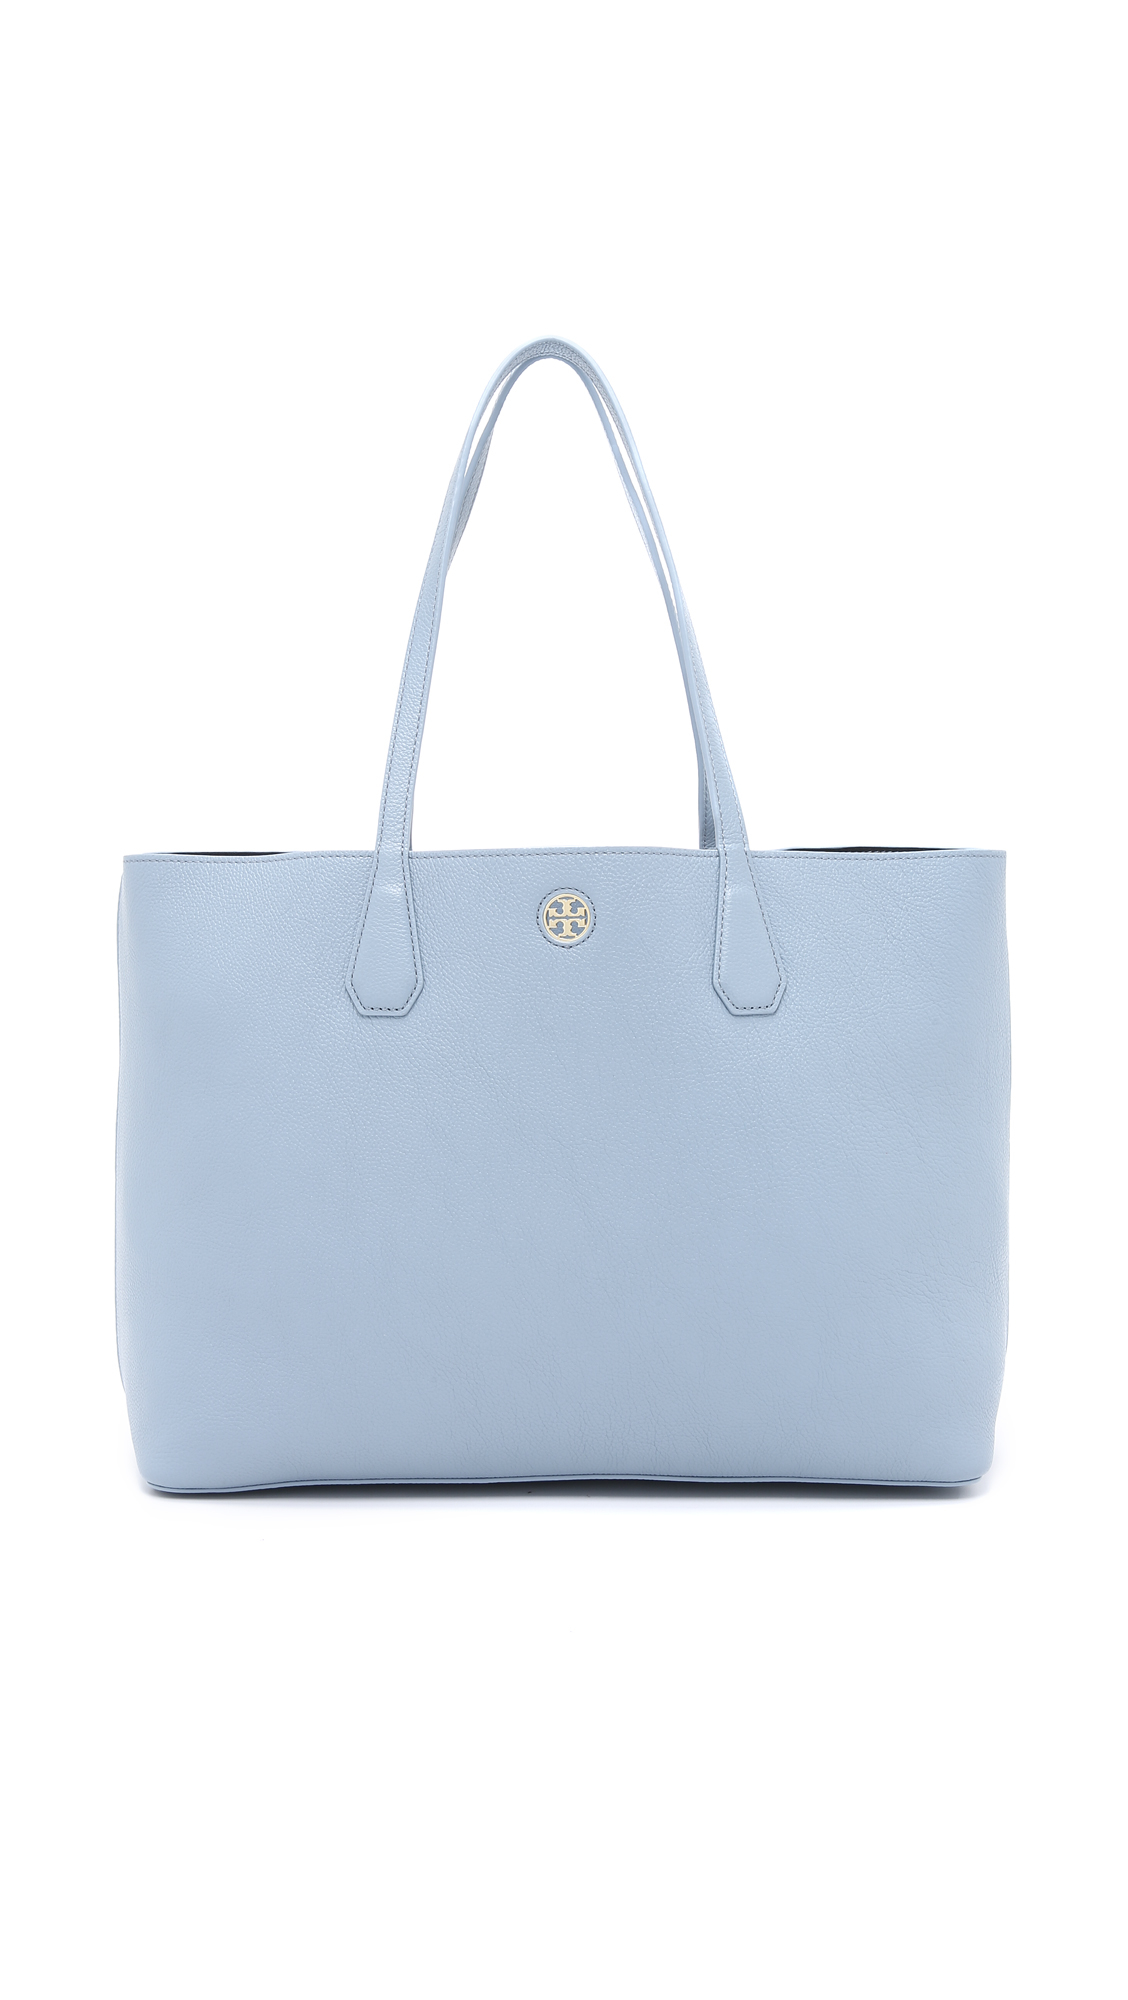 Totes bags Tory Burch - perry shopping bag in light blue leather